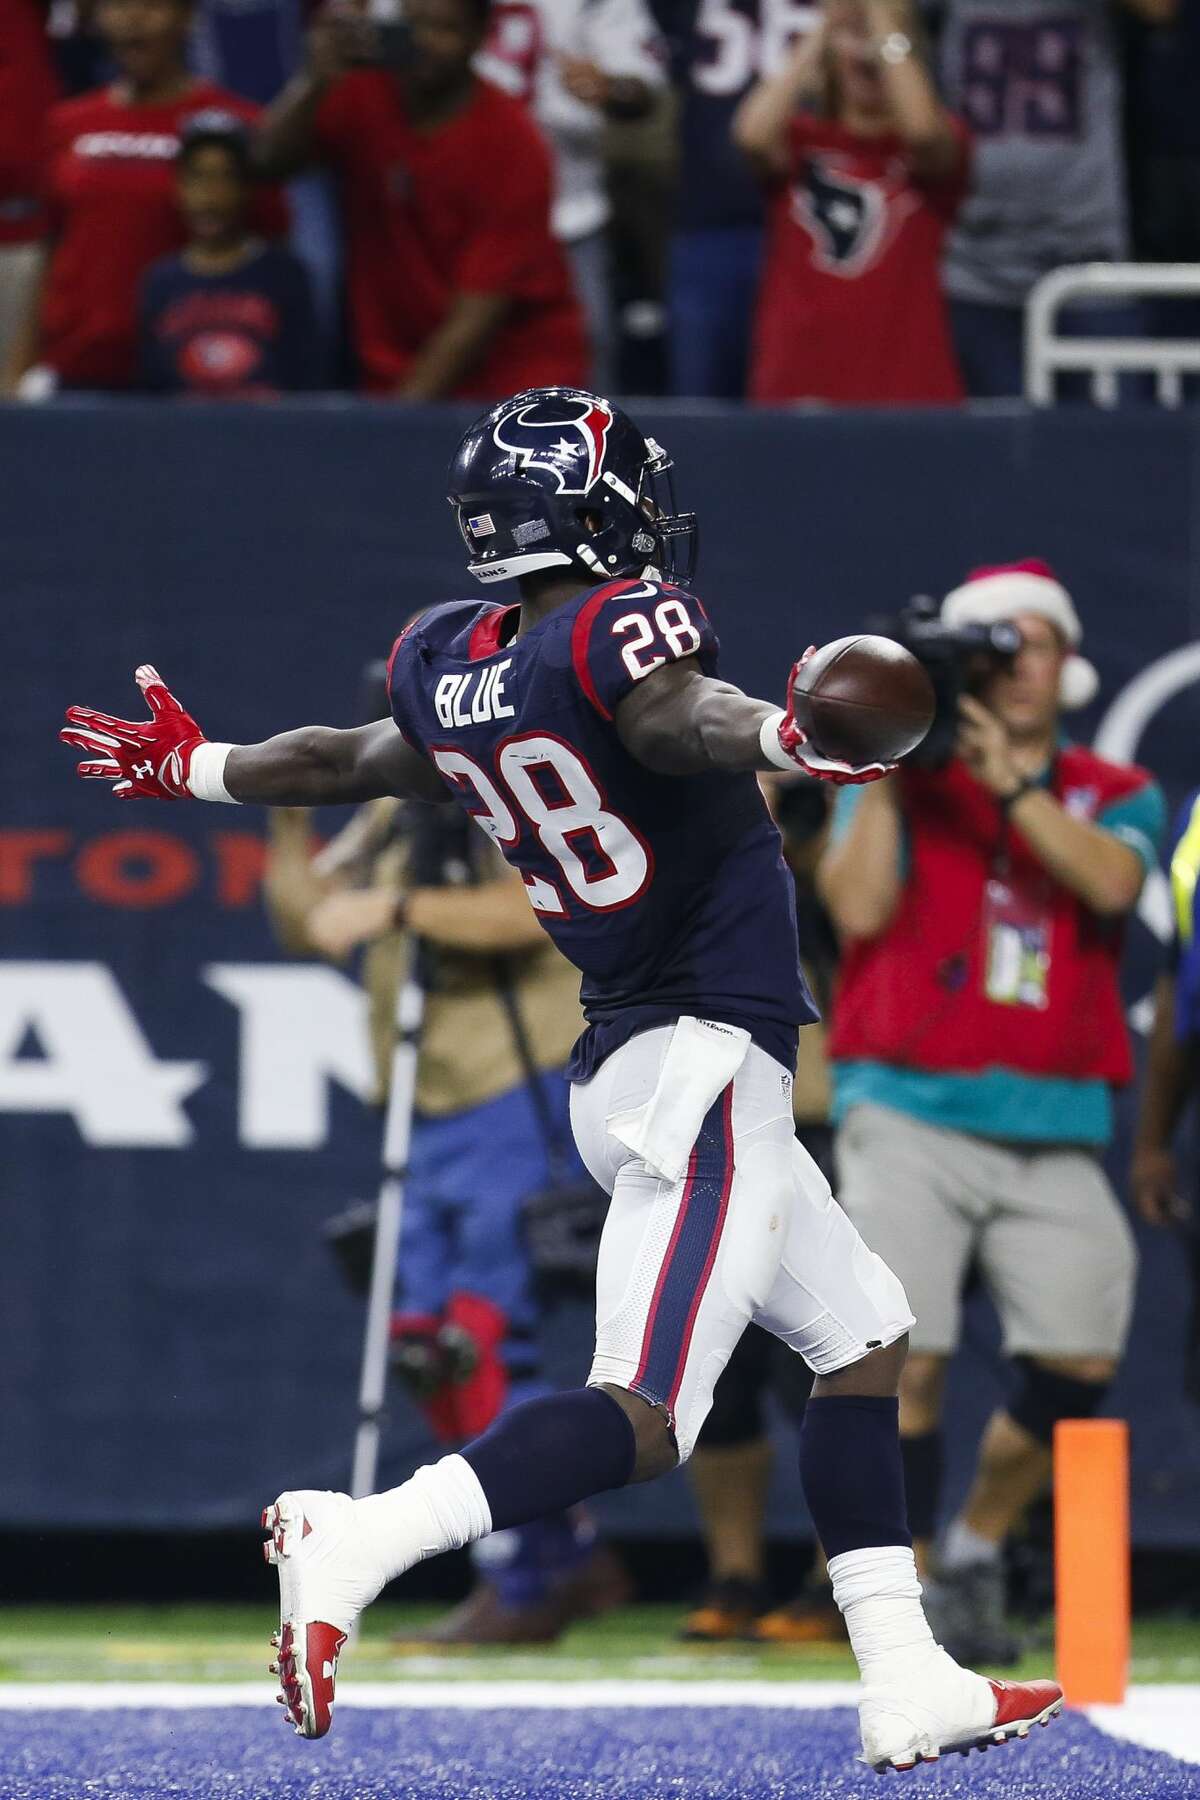 Houston Texans running back Alfred Blue (28) celebrates as he scores a touchdown during the fourth quarter of an NFL football game at NRG Stadium on Saturday, Dec. 24, 2016, in Houston. ( Brett Coomer / Houston Chronicle )